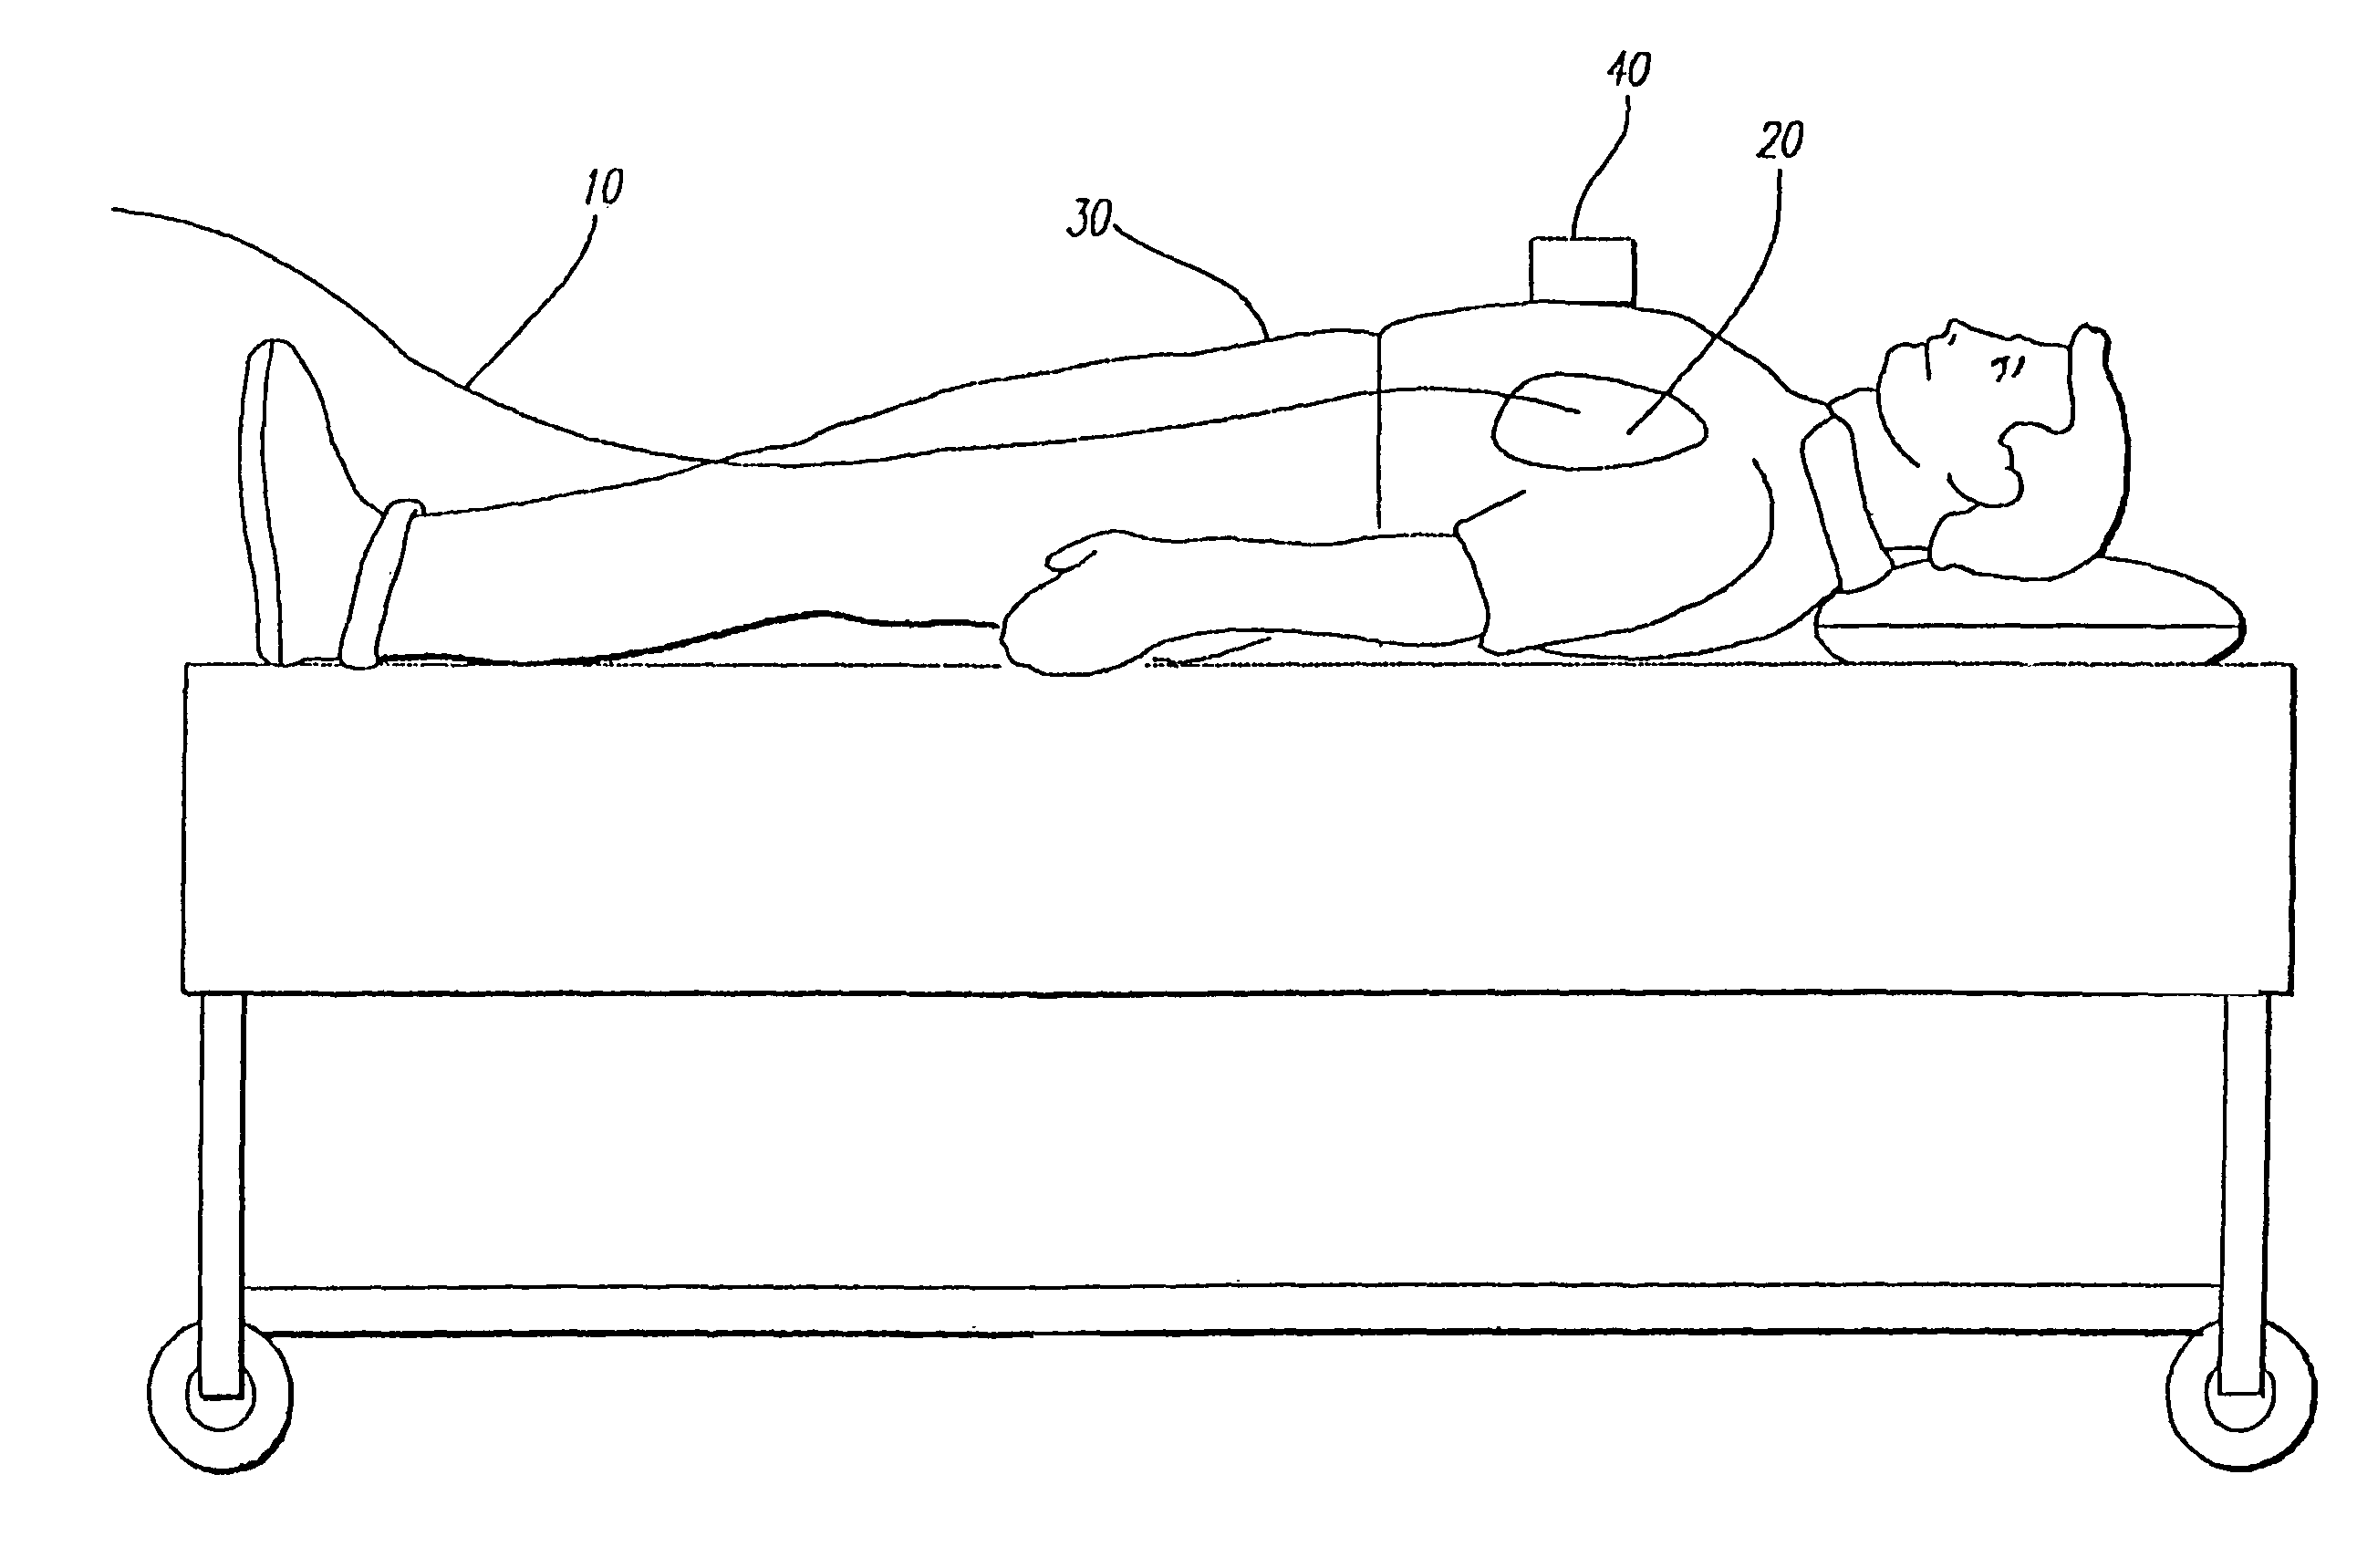 Apparatus and method for inducing vibrations in a living body